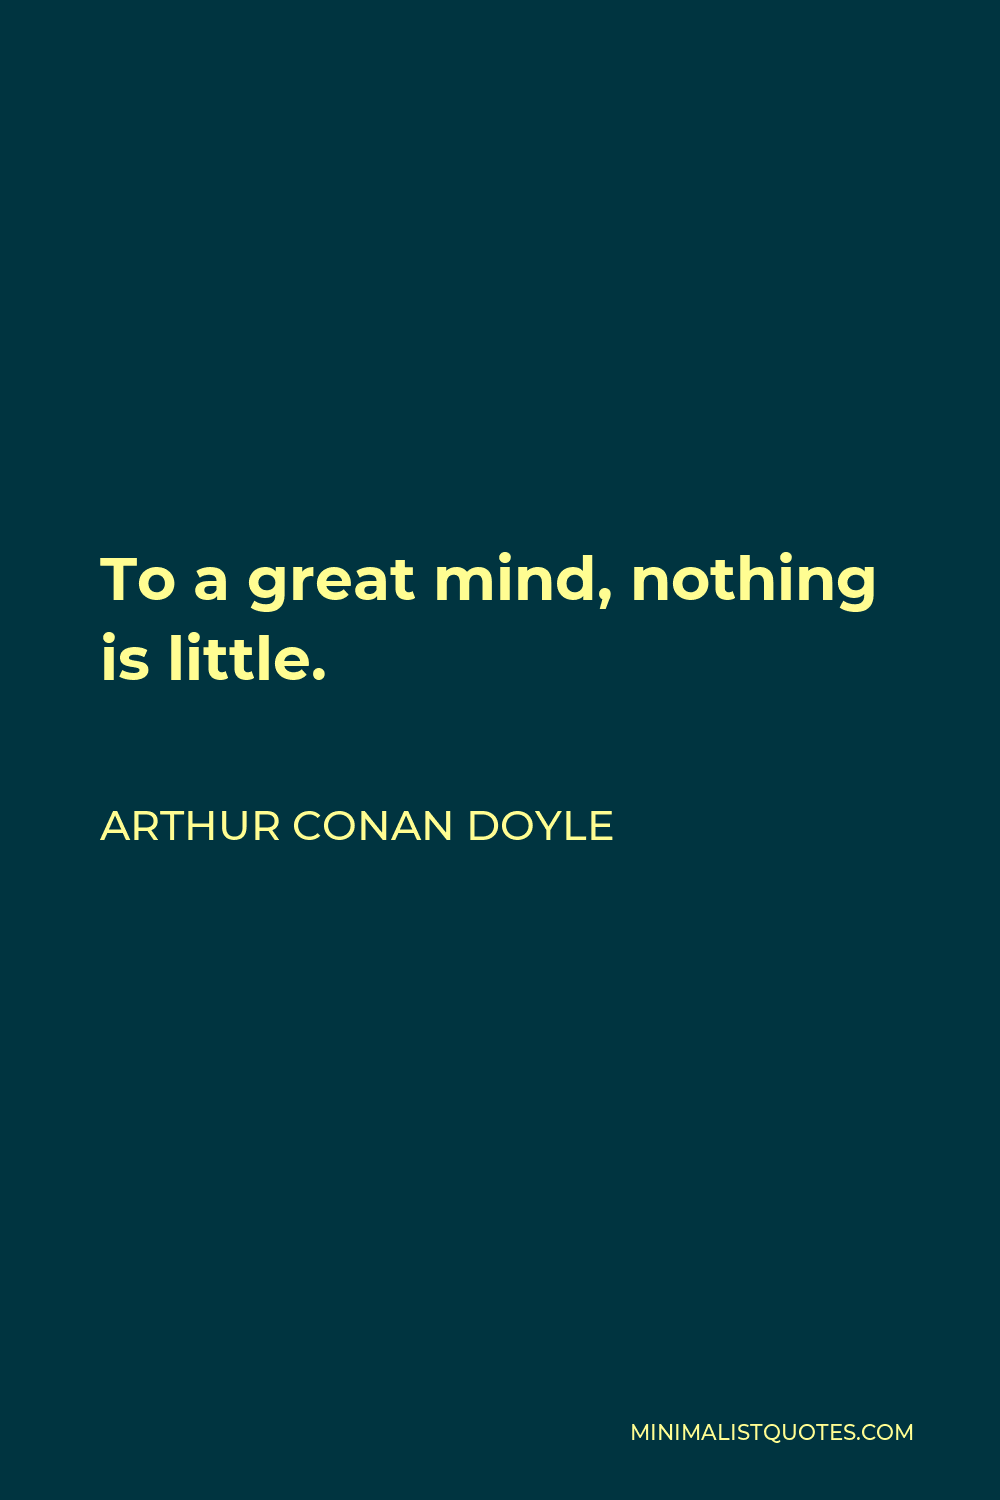 Arthur Conan Doyle Quote - To a great mind, nothing is little.